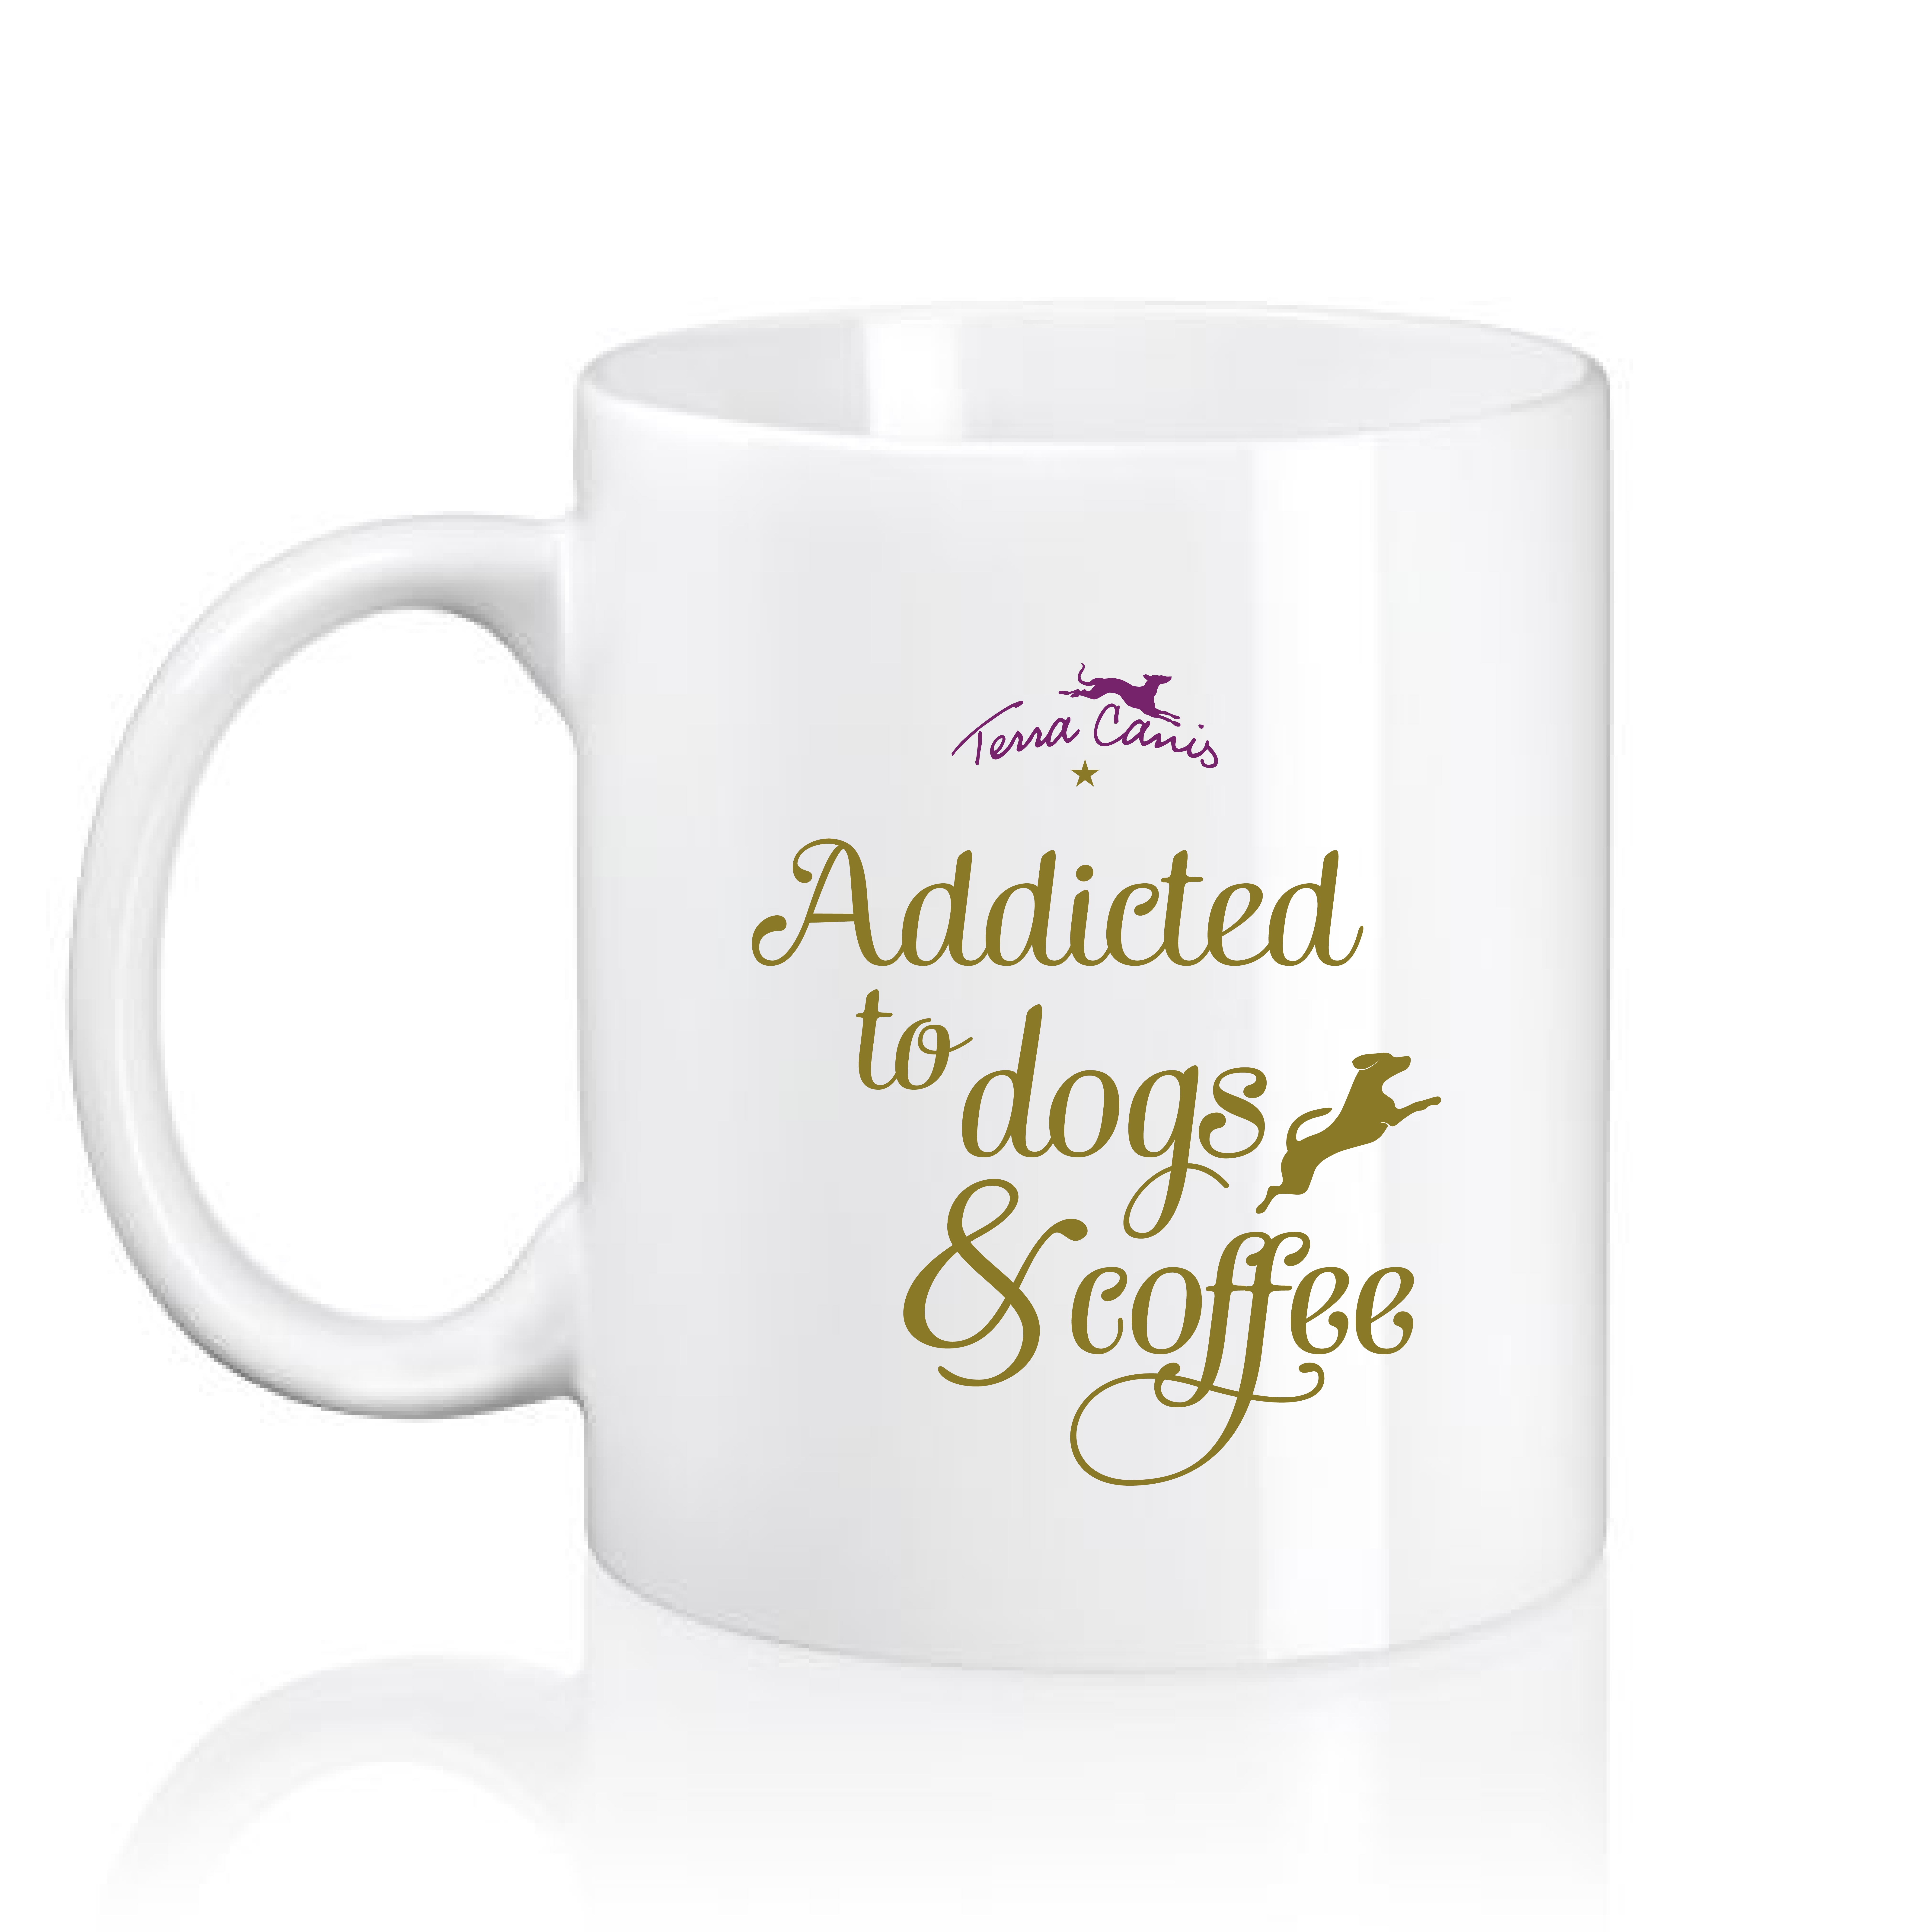 Tazza "Addicted to dogs & coffee"